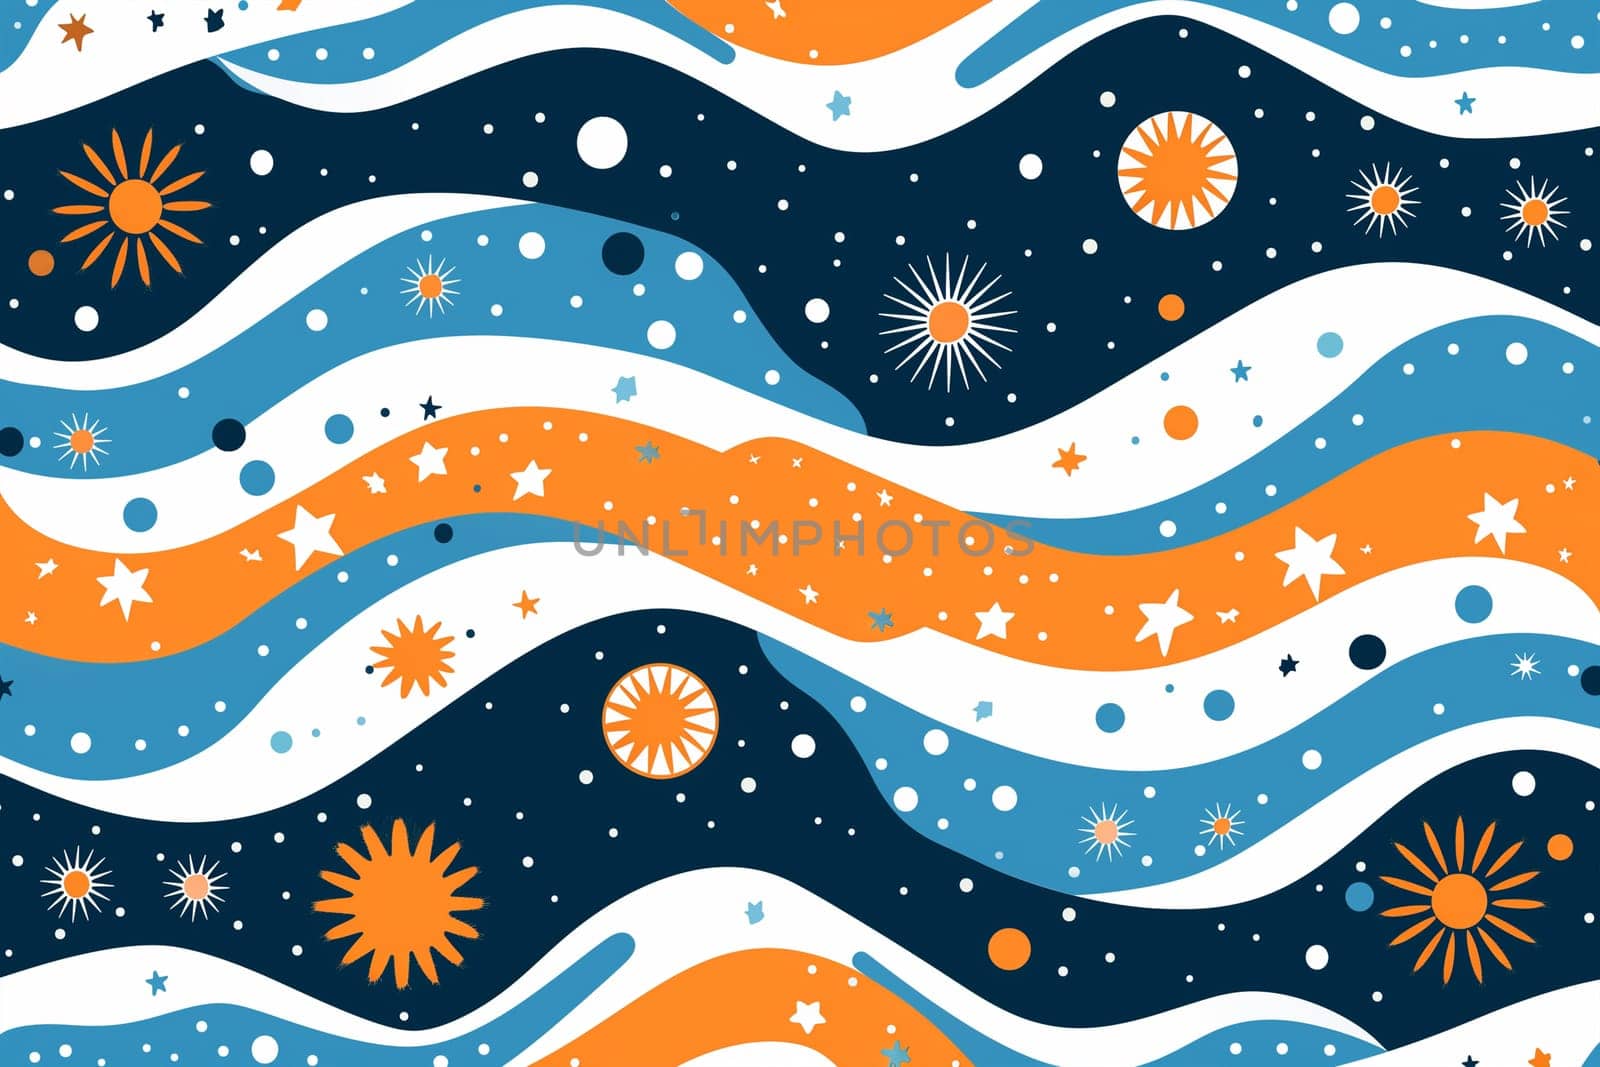 Blue and orange background featuring stars and waves in a vibrant display.